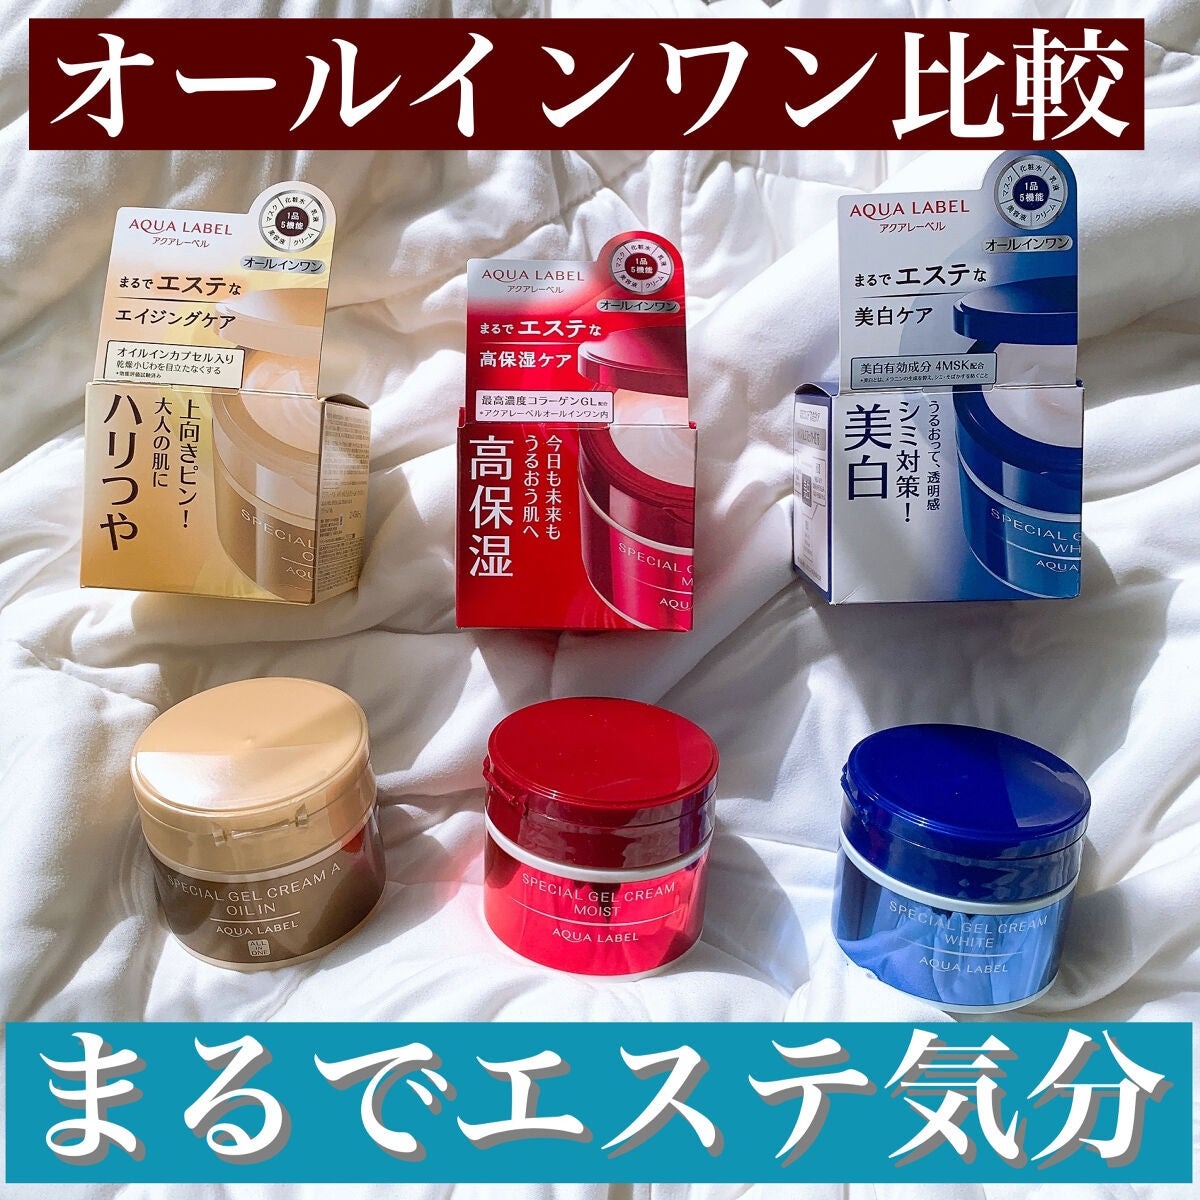 review chat kem duong aqualabel shiseido japan all in one